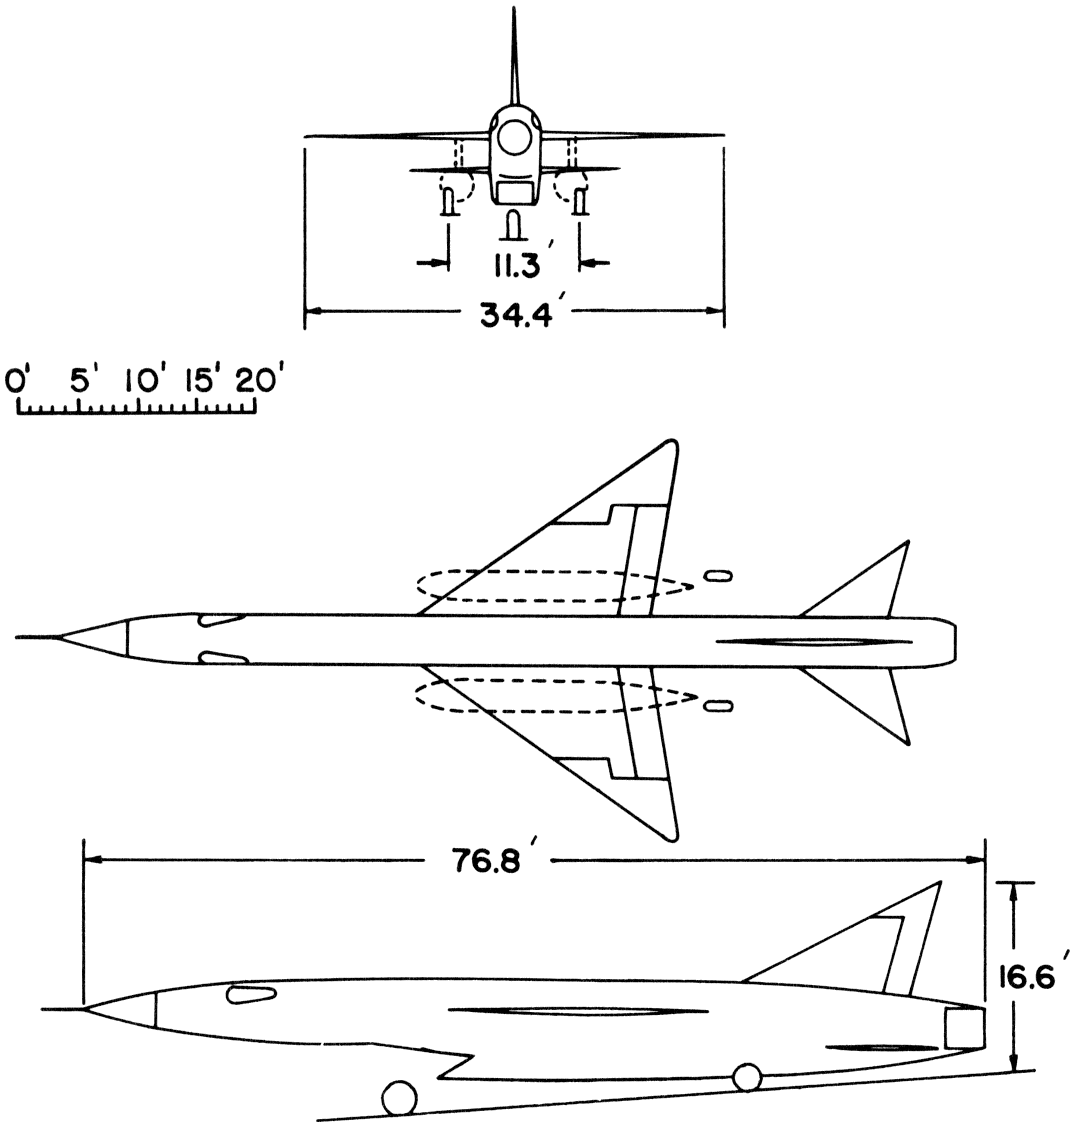 A 3-view line drawing of the Republic XF-103